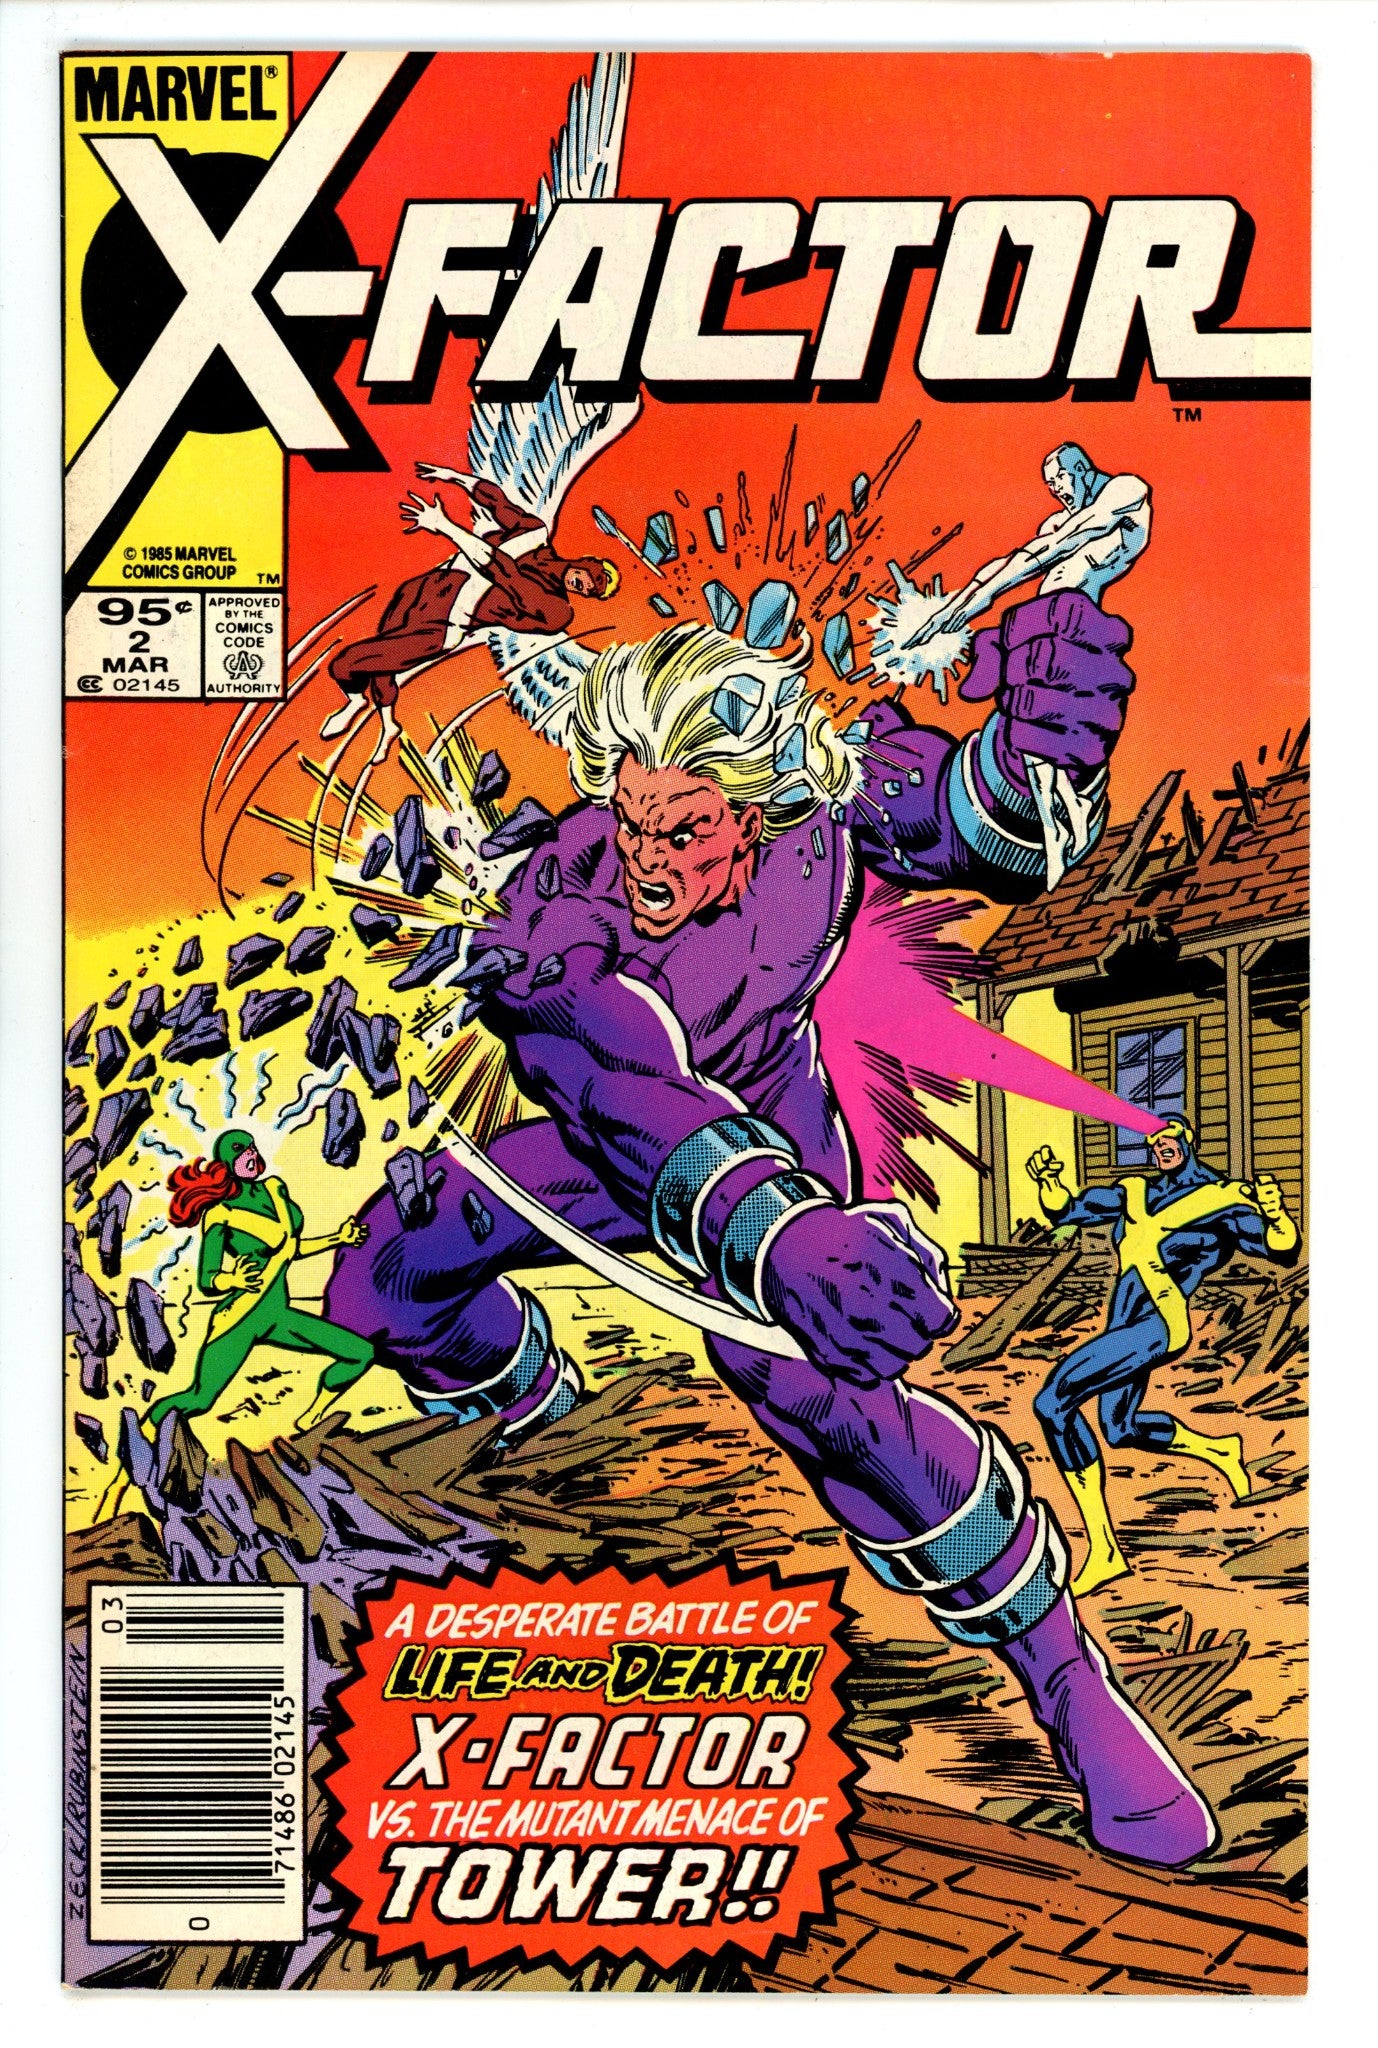 X-Factor Vol 1 2 FN/VF (7.0) (1986) Canadian Price Variant 